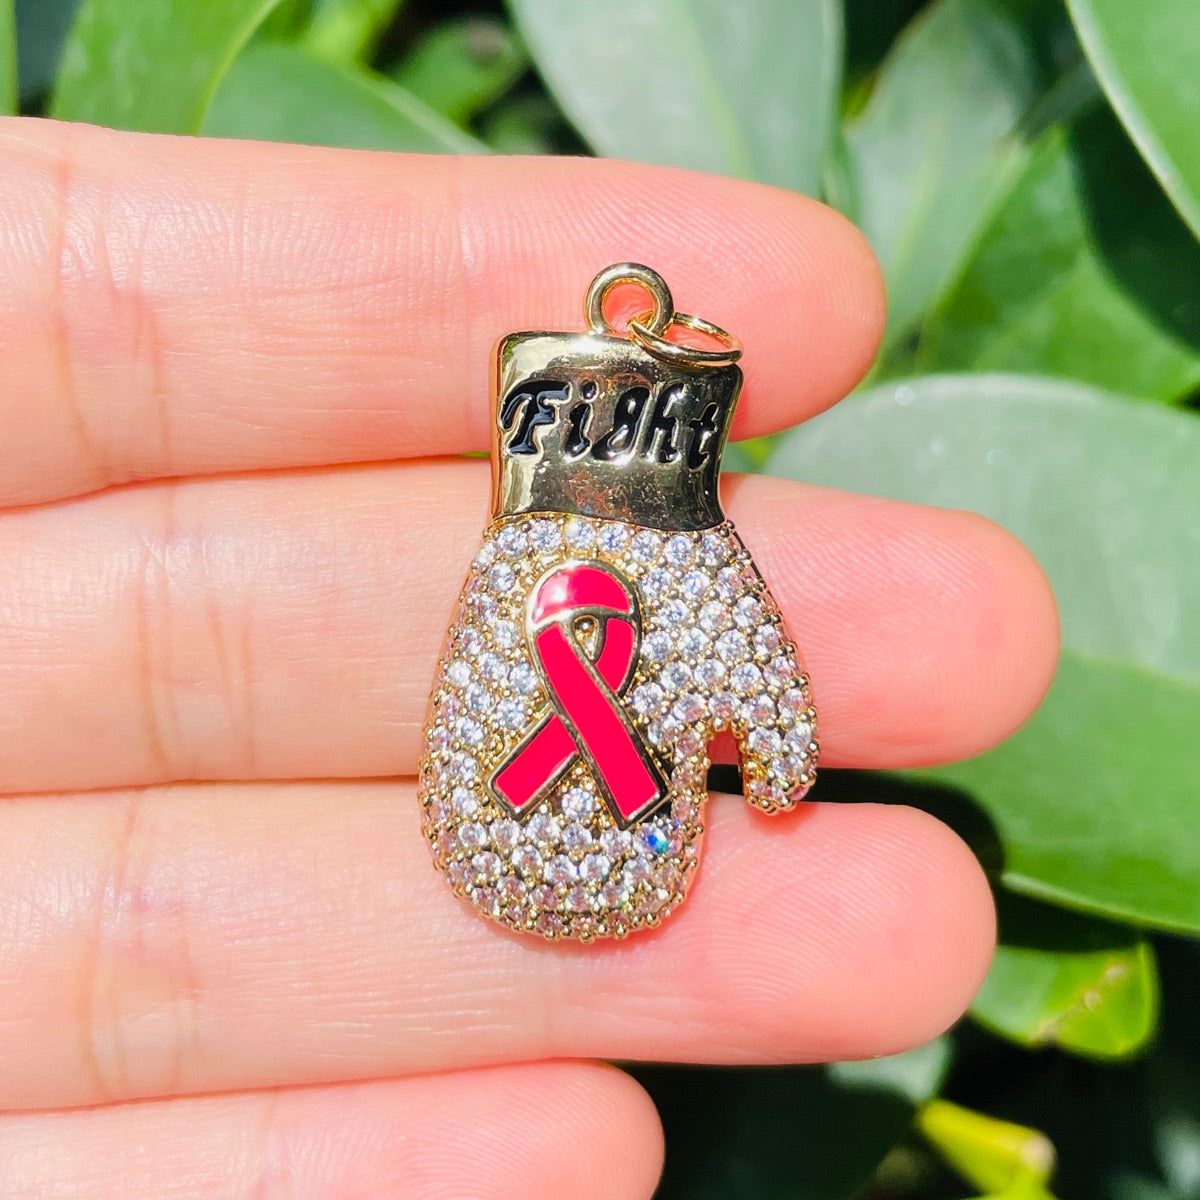 10pcs/lot CZ Pave Pink Ribbon Fight Gloves Charms - Breast Cancer Awareness Gold CZ Paved Charms Breast Cancer Awareness New Charms Arrivals Charms Beads Beyond